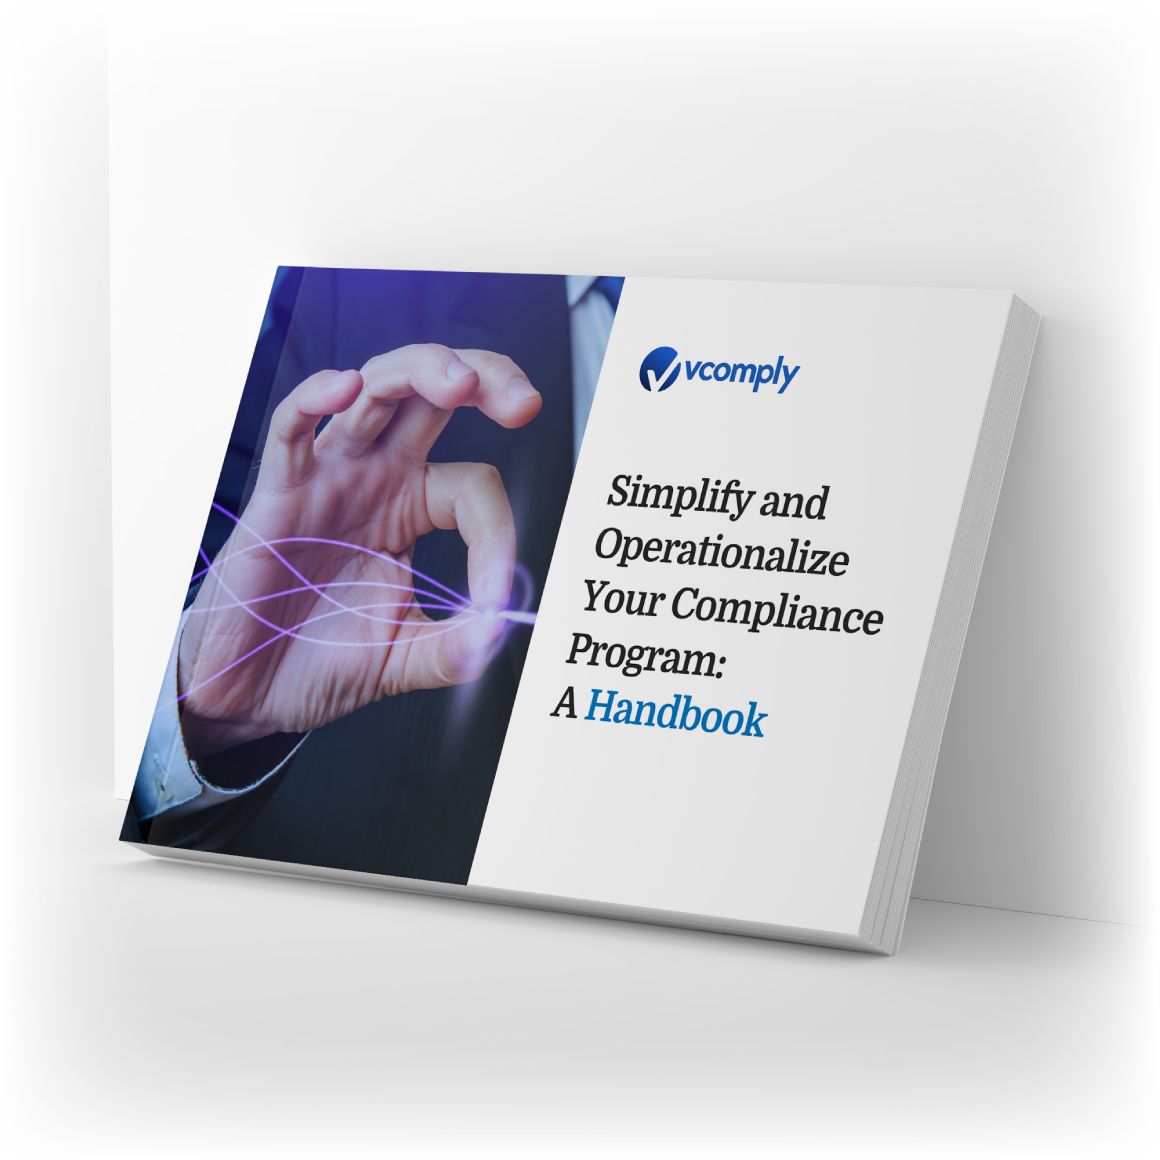 Simplify-and-Operationalize-Your-Compliance-Program-A-Handbook